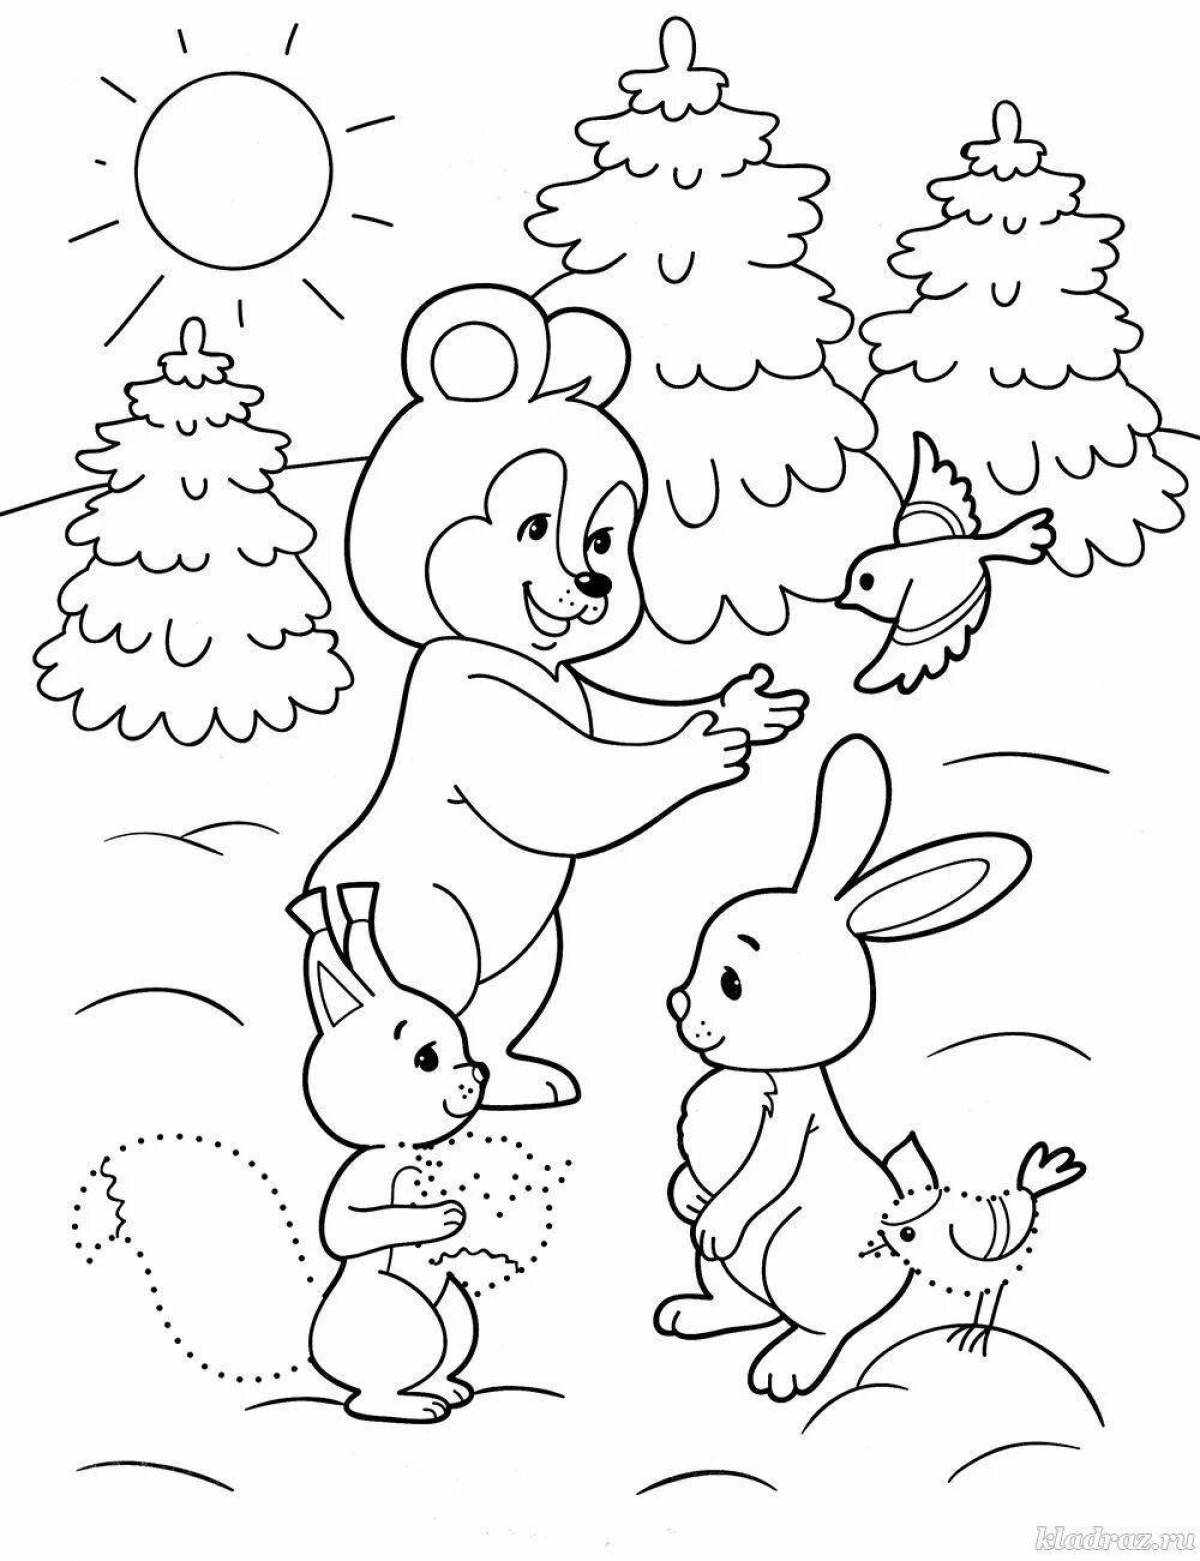 Coloring book glowing Christmas rabbit